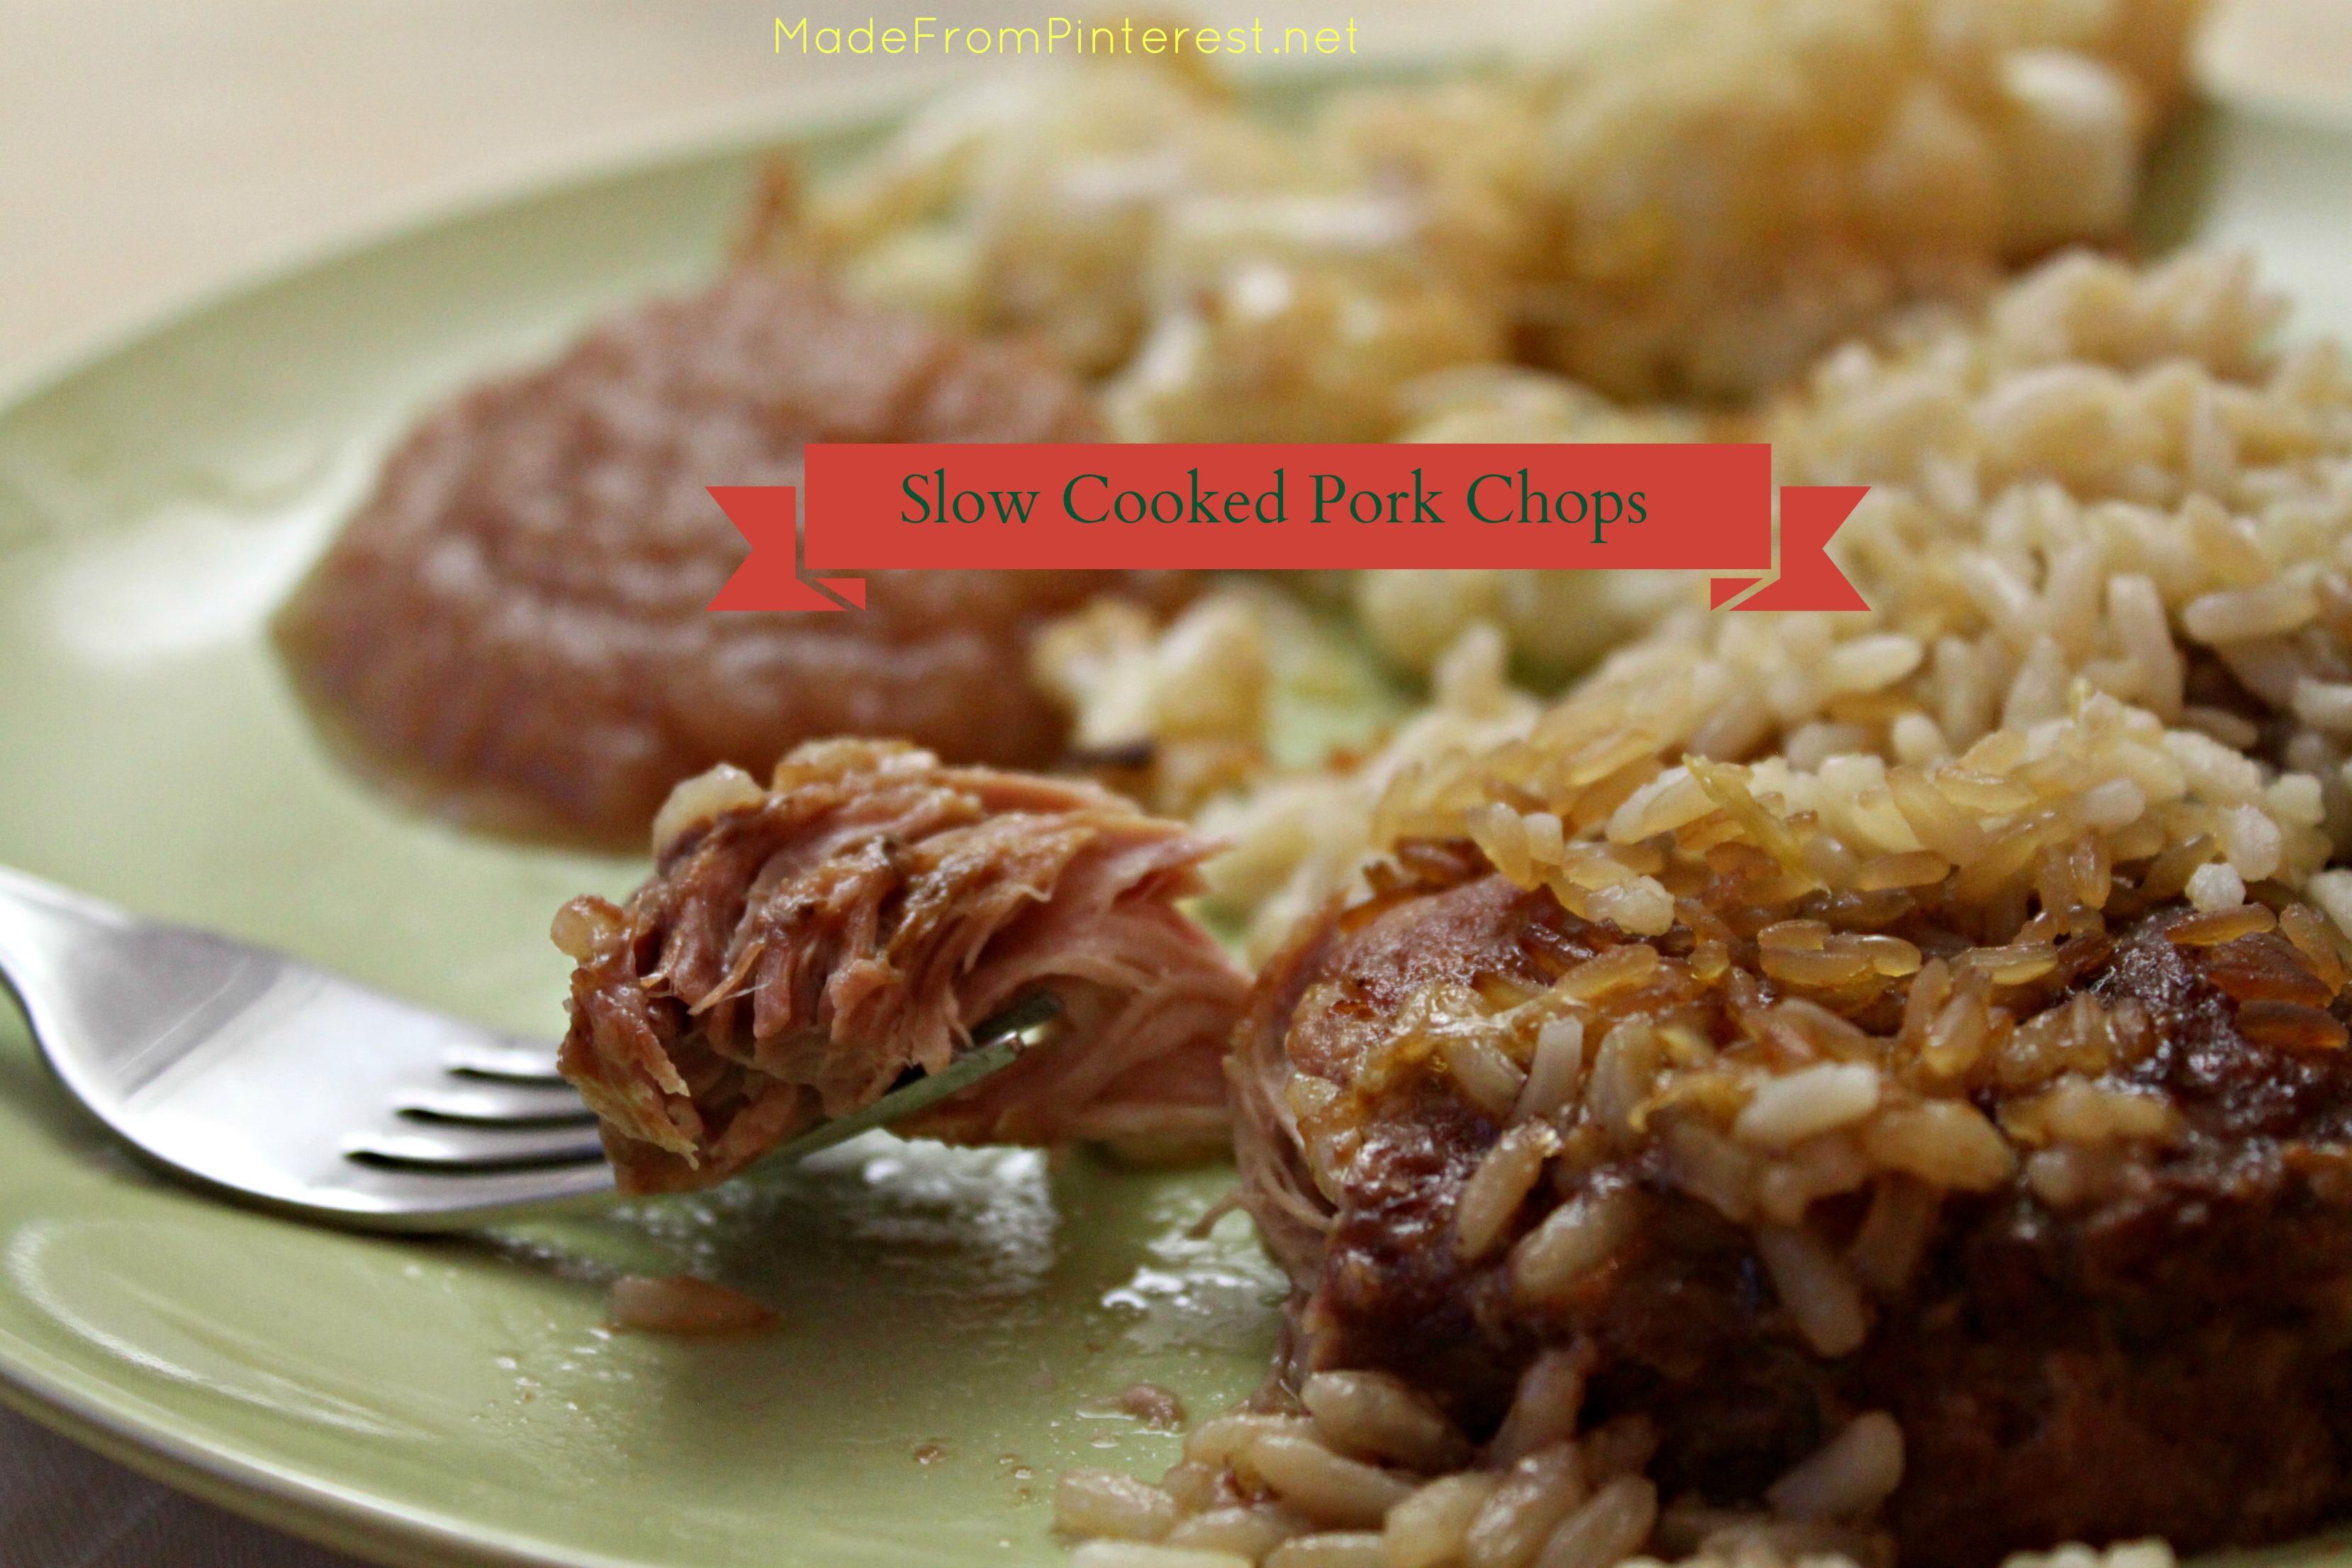 Slow Cooked Pork Chops